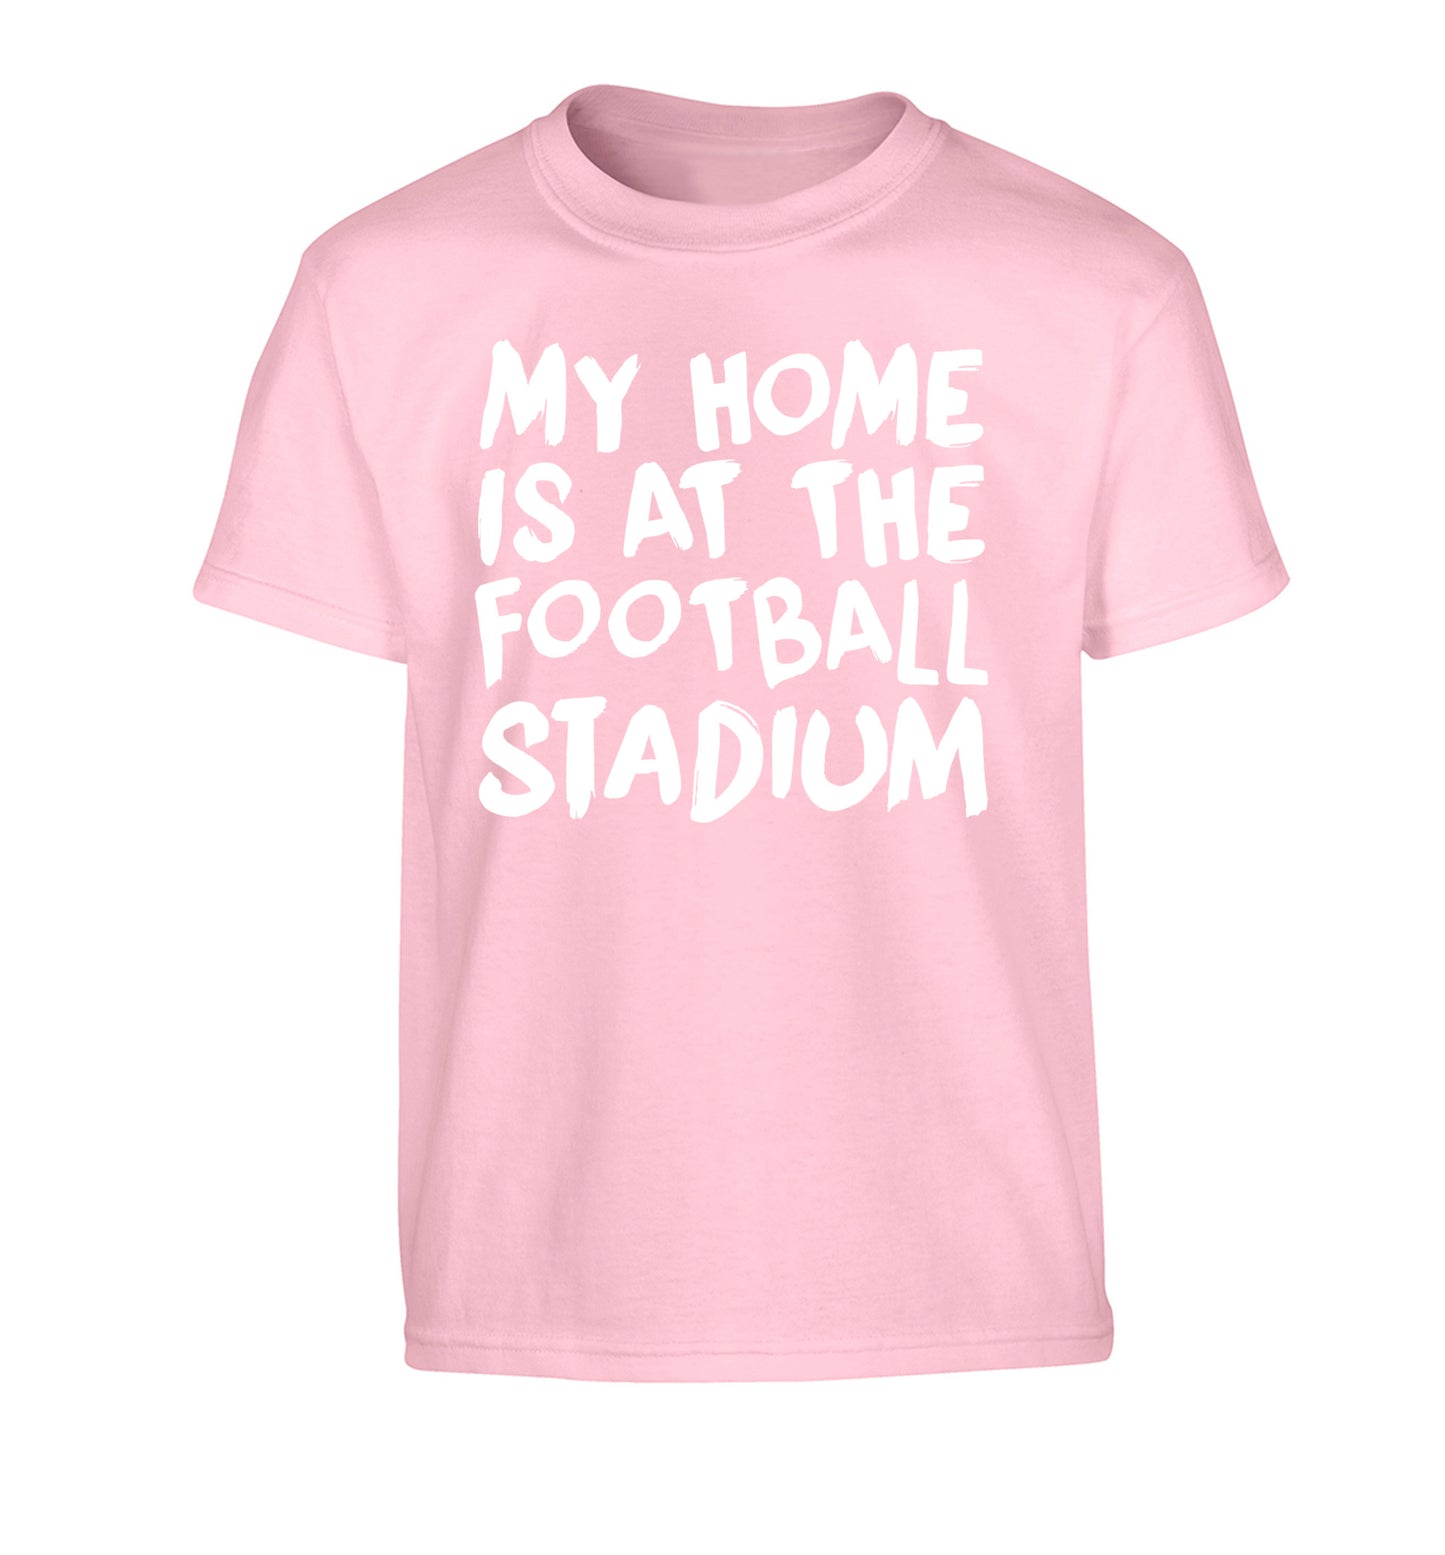 My home is at the football stadium Children's light pink Tshirt 12-14 Years